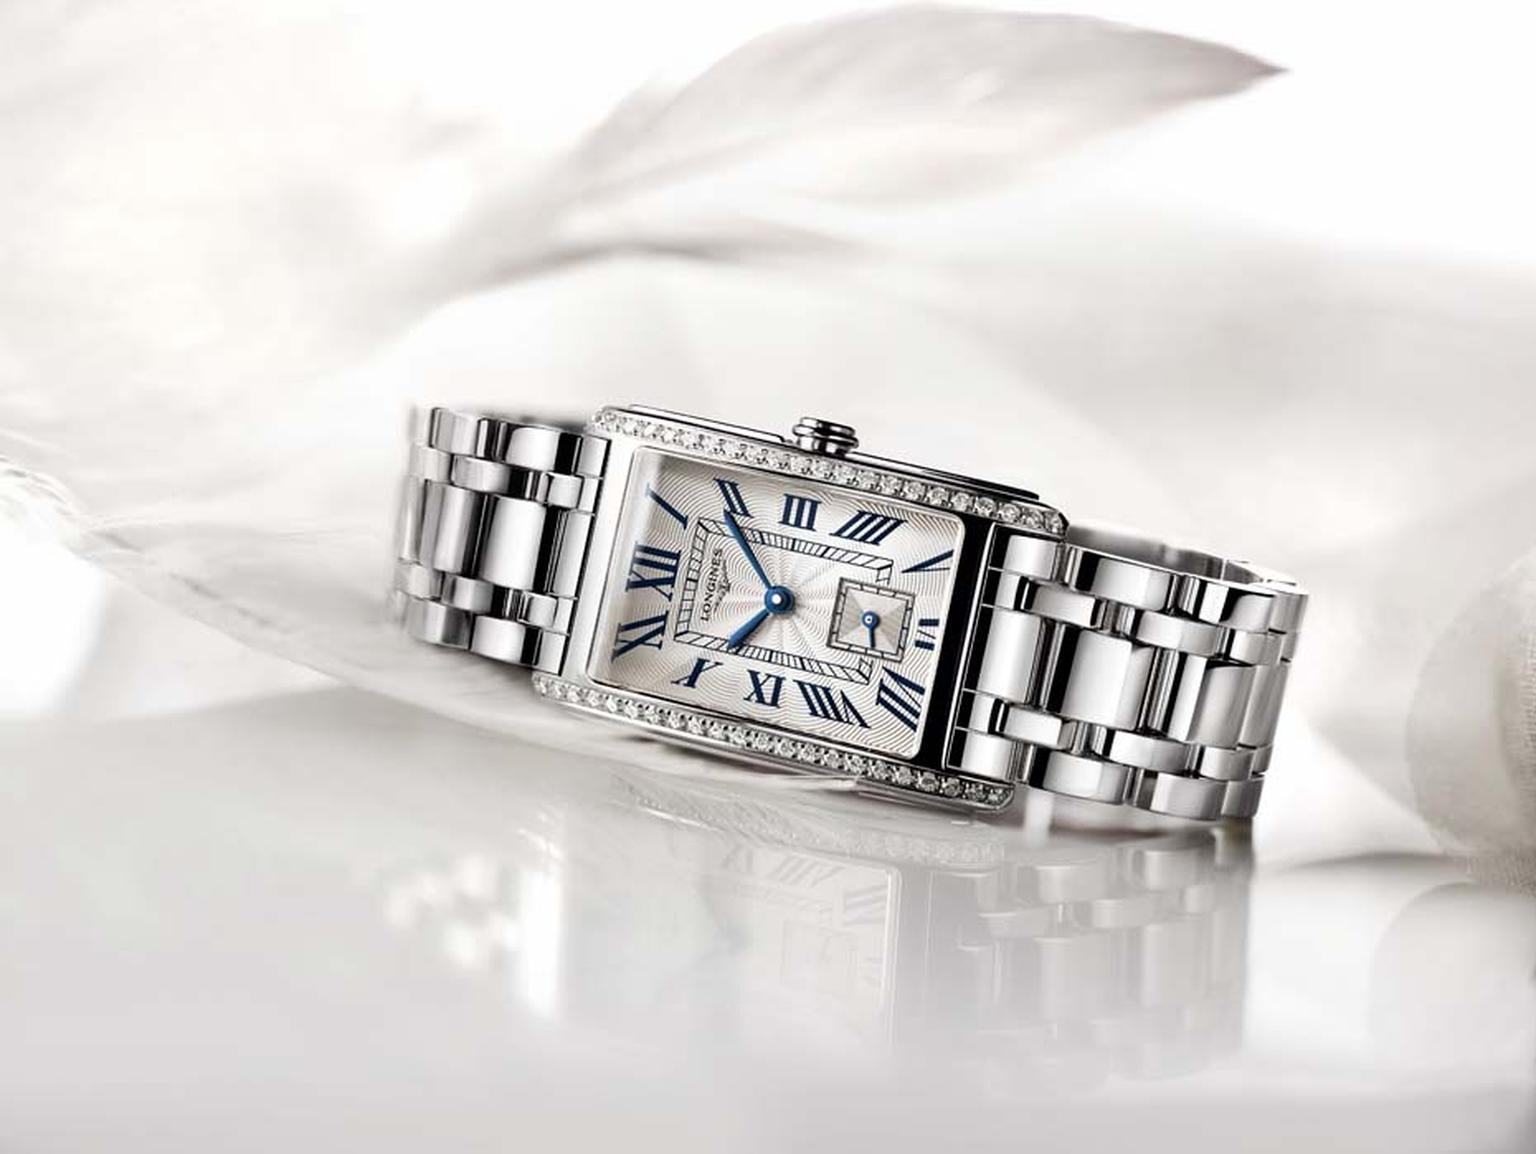 Mothers Day Watches US_Longines_Dolce Vita stainless steel watch with diamonds side.jpg